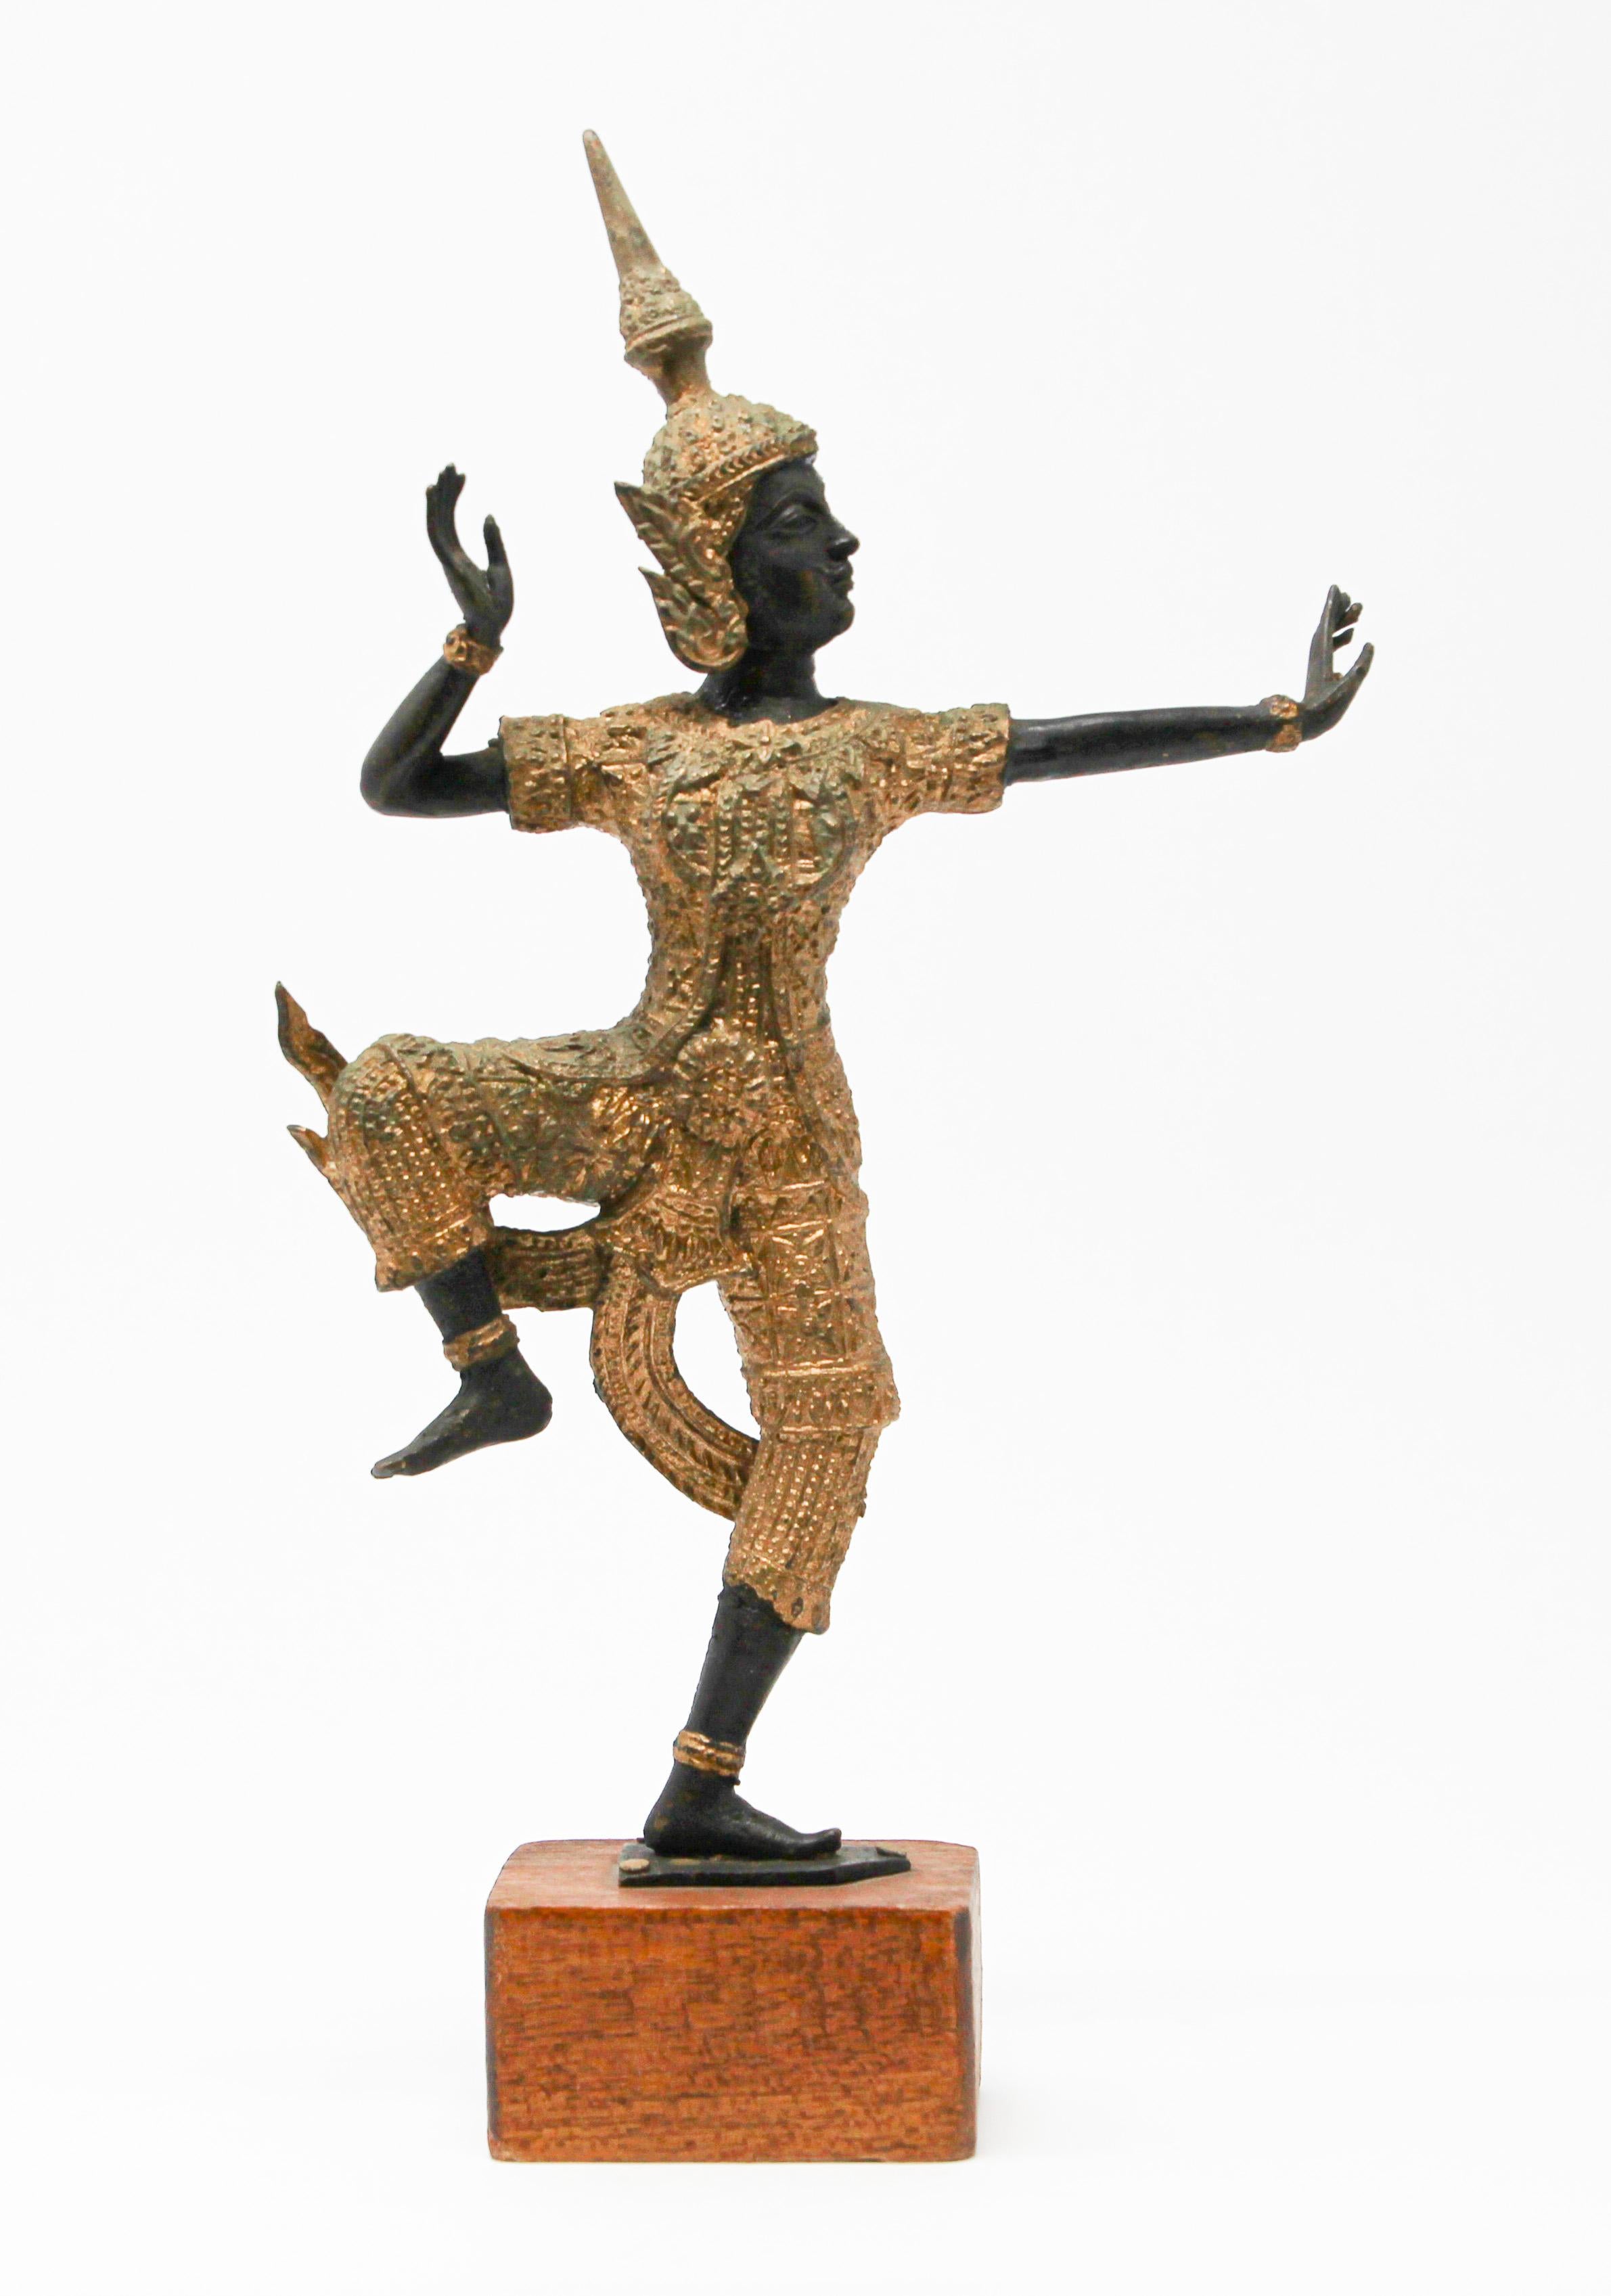 Vintage bronze statue in gold and dark green of Prince Rama dancing.
The Prince hero, Phra Rama (Rama), derived from Thailand’s national epic, Ramakien (Ramayana).
The figure is the distinguishing features of Khon, Thai classical drama. Smooth